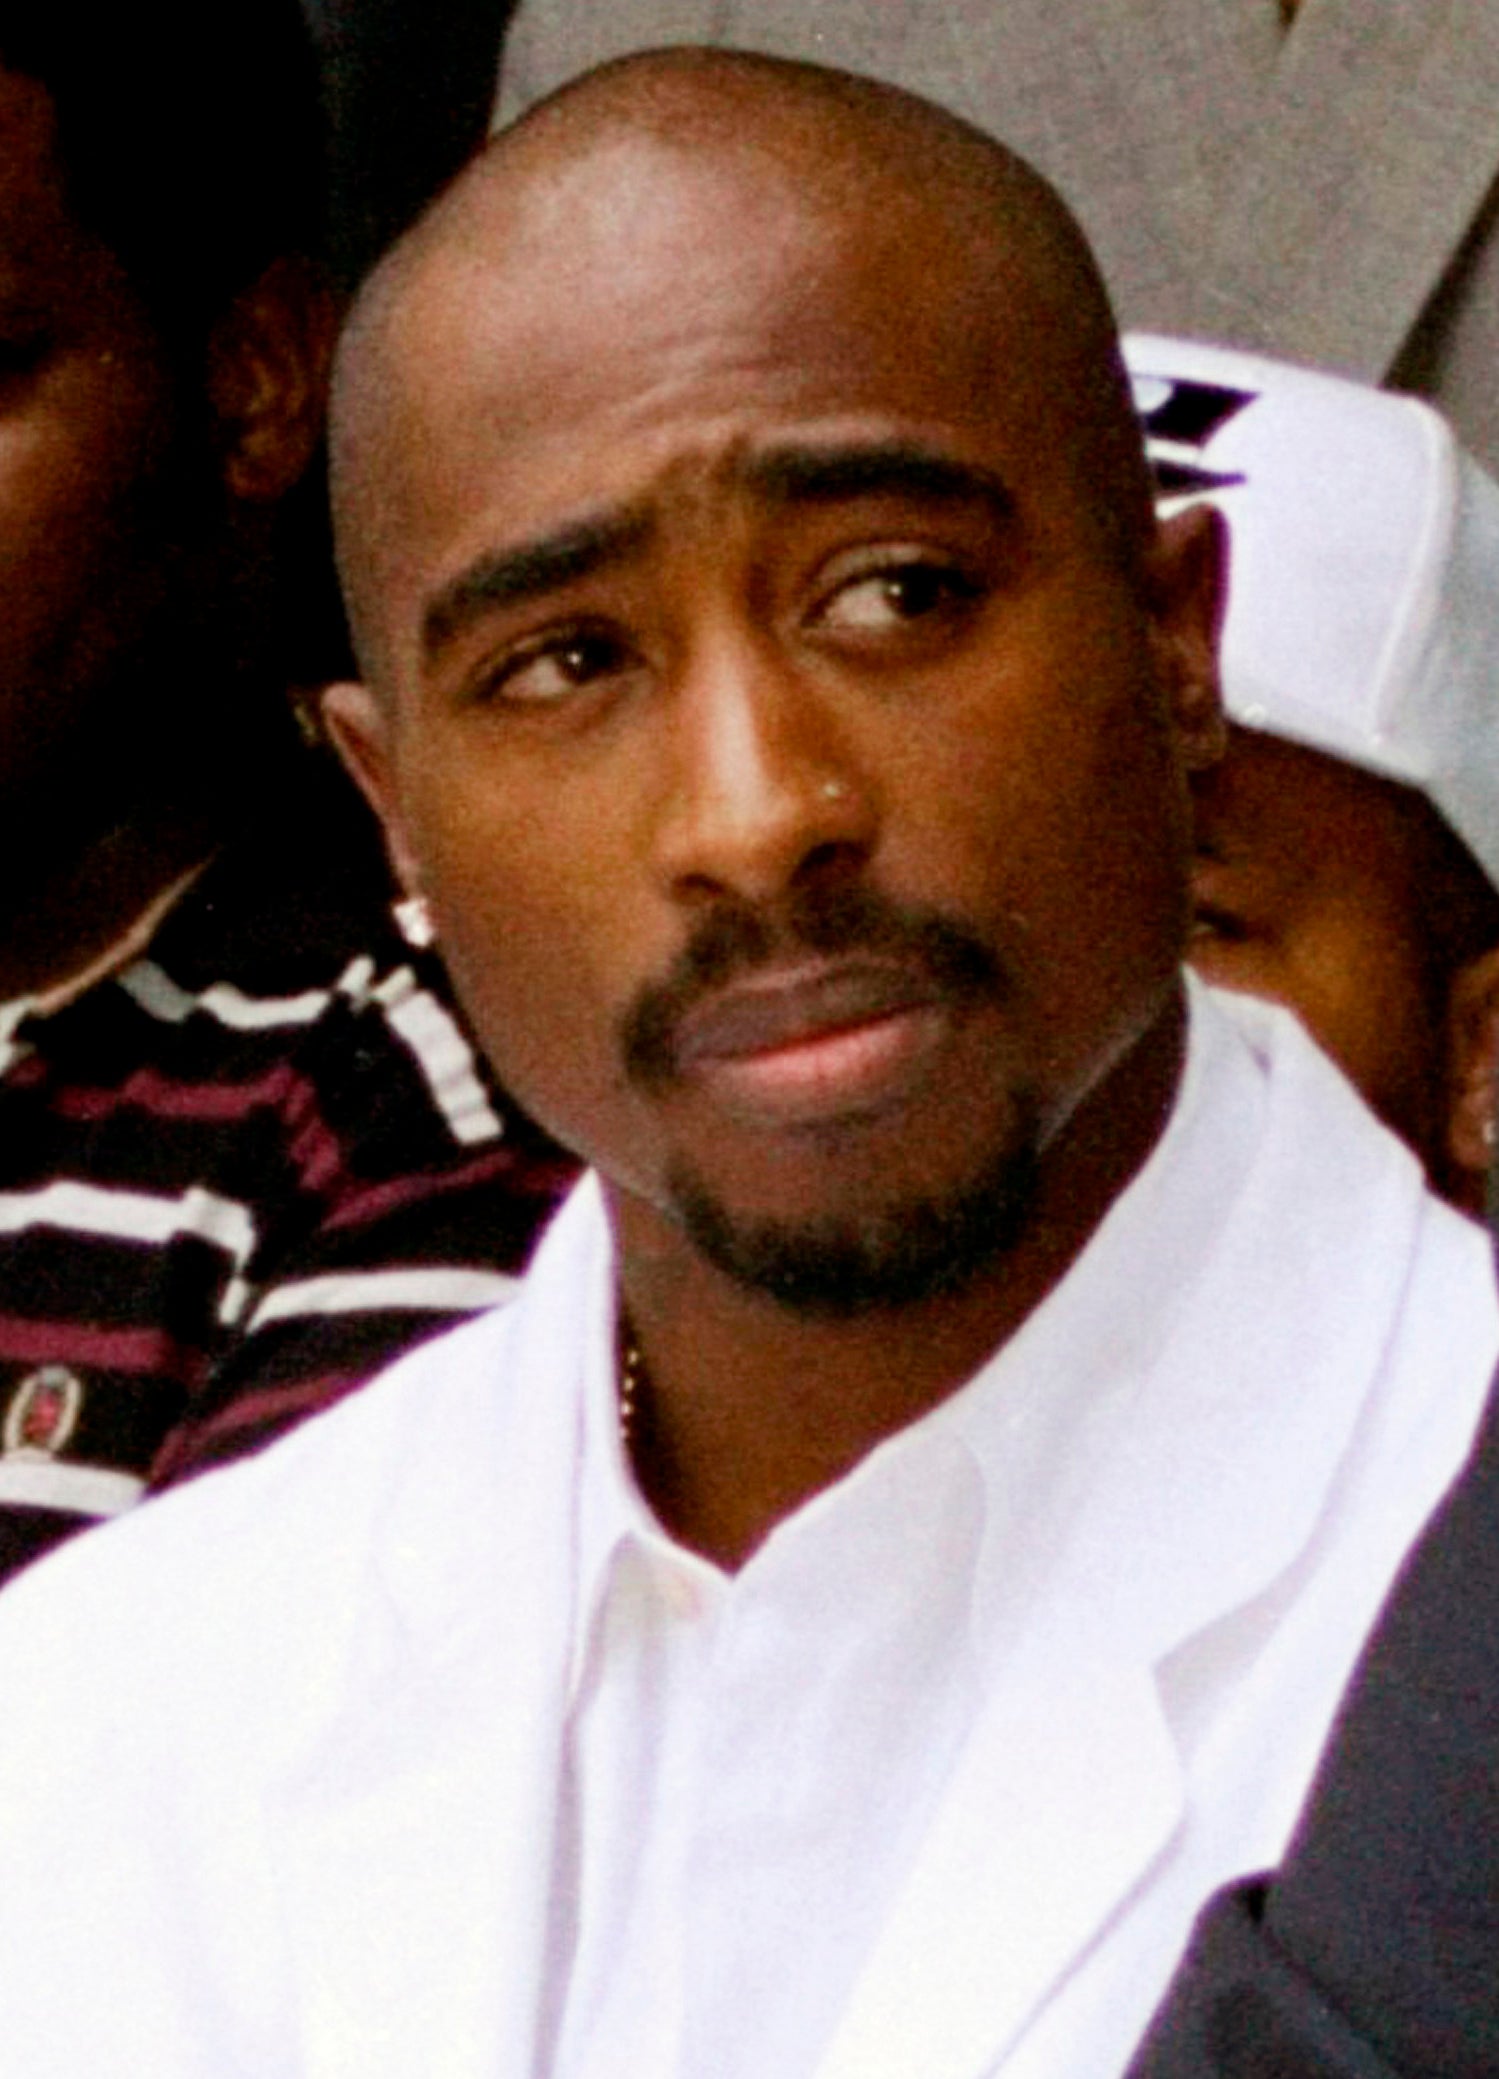 Tupac Shakur pictured in April 1996 – months before his murder